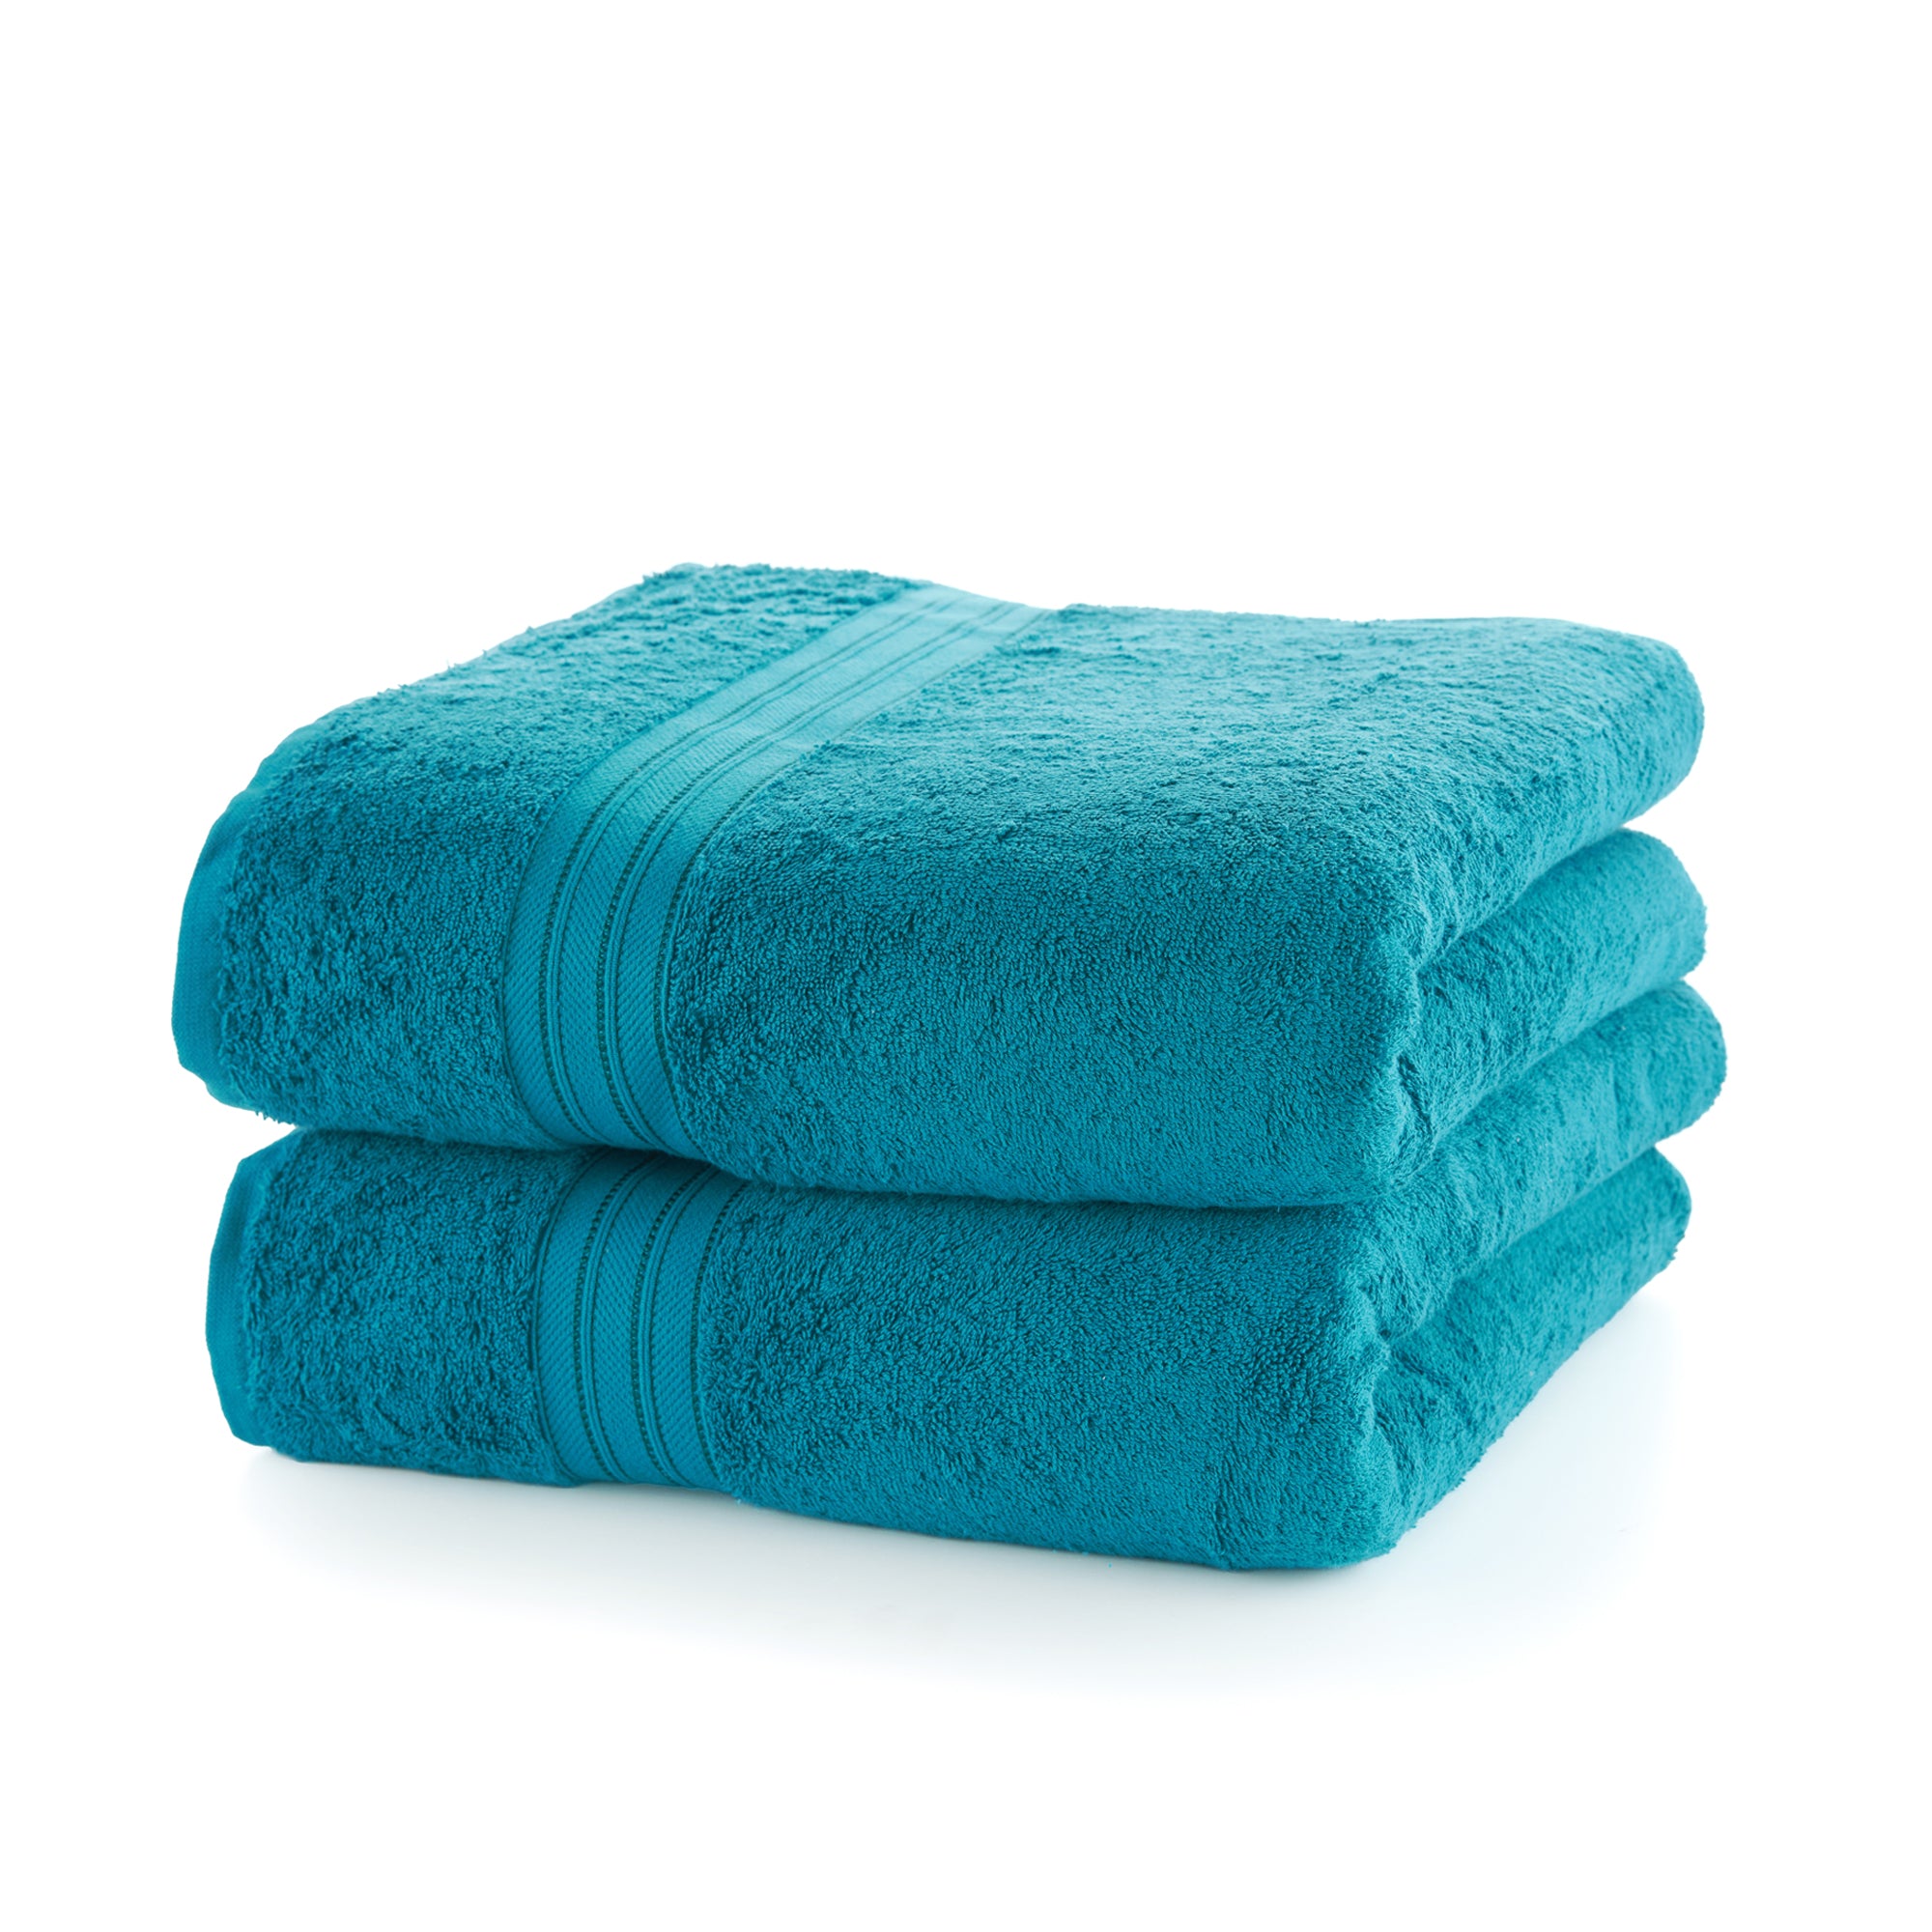 Mellanni Washcloth 12 inchx12 inch, 100% Terry Cotton, 12 Pack, Teal, Size: 12 x 12, Green